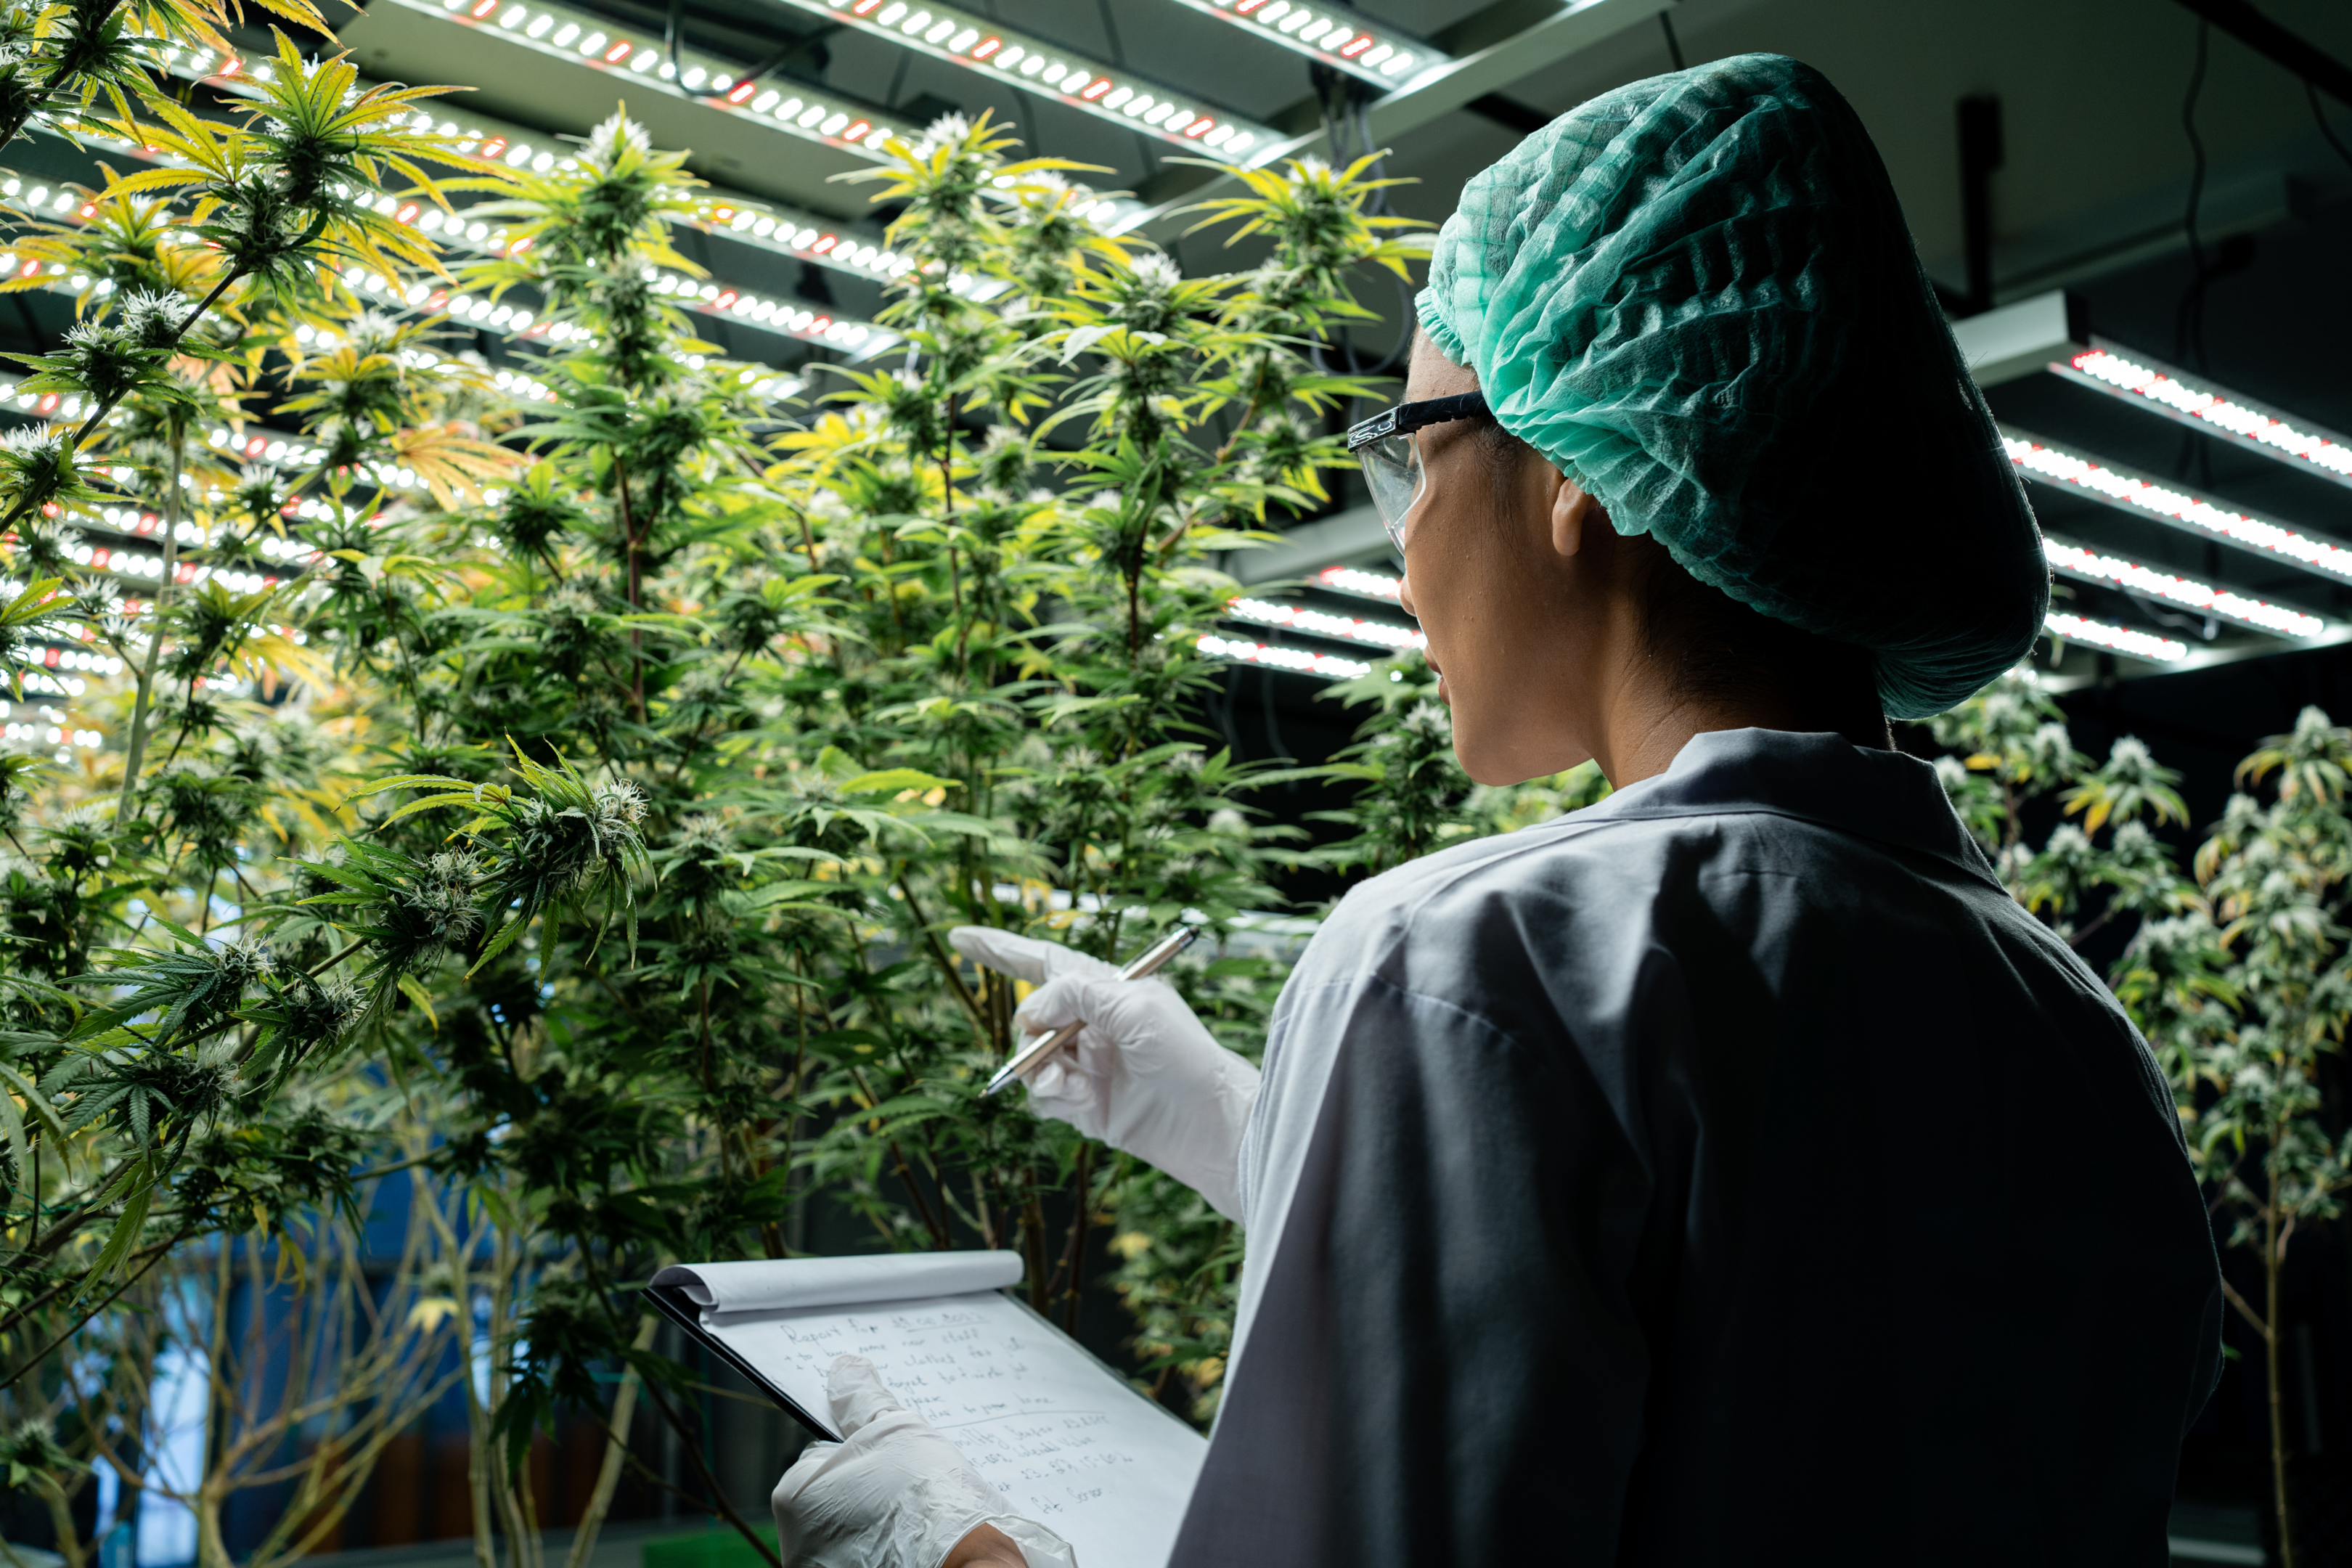 The awesome article that highlights the school emphasizes that this was carefully considered and seen as a benefit to the industry. Students can have a first hand account on planting, running a farm, cooking with cannabis, and basically having a class to cover all parts of the industry.